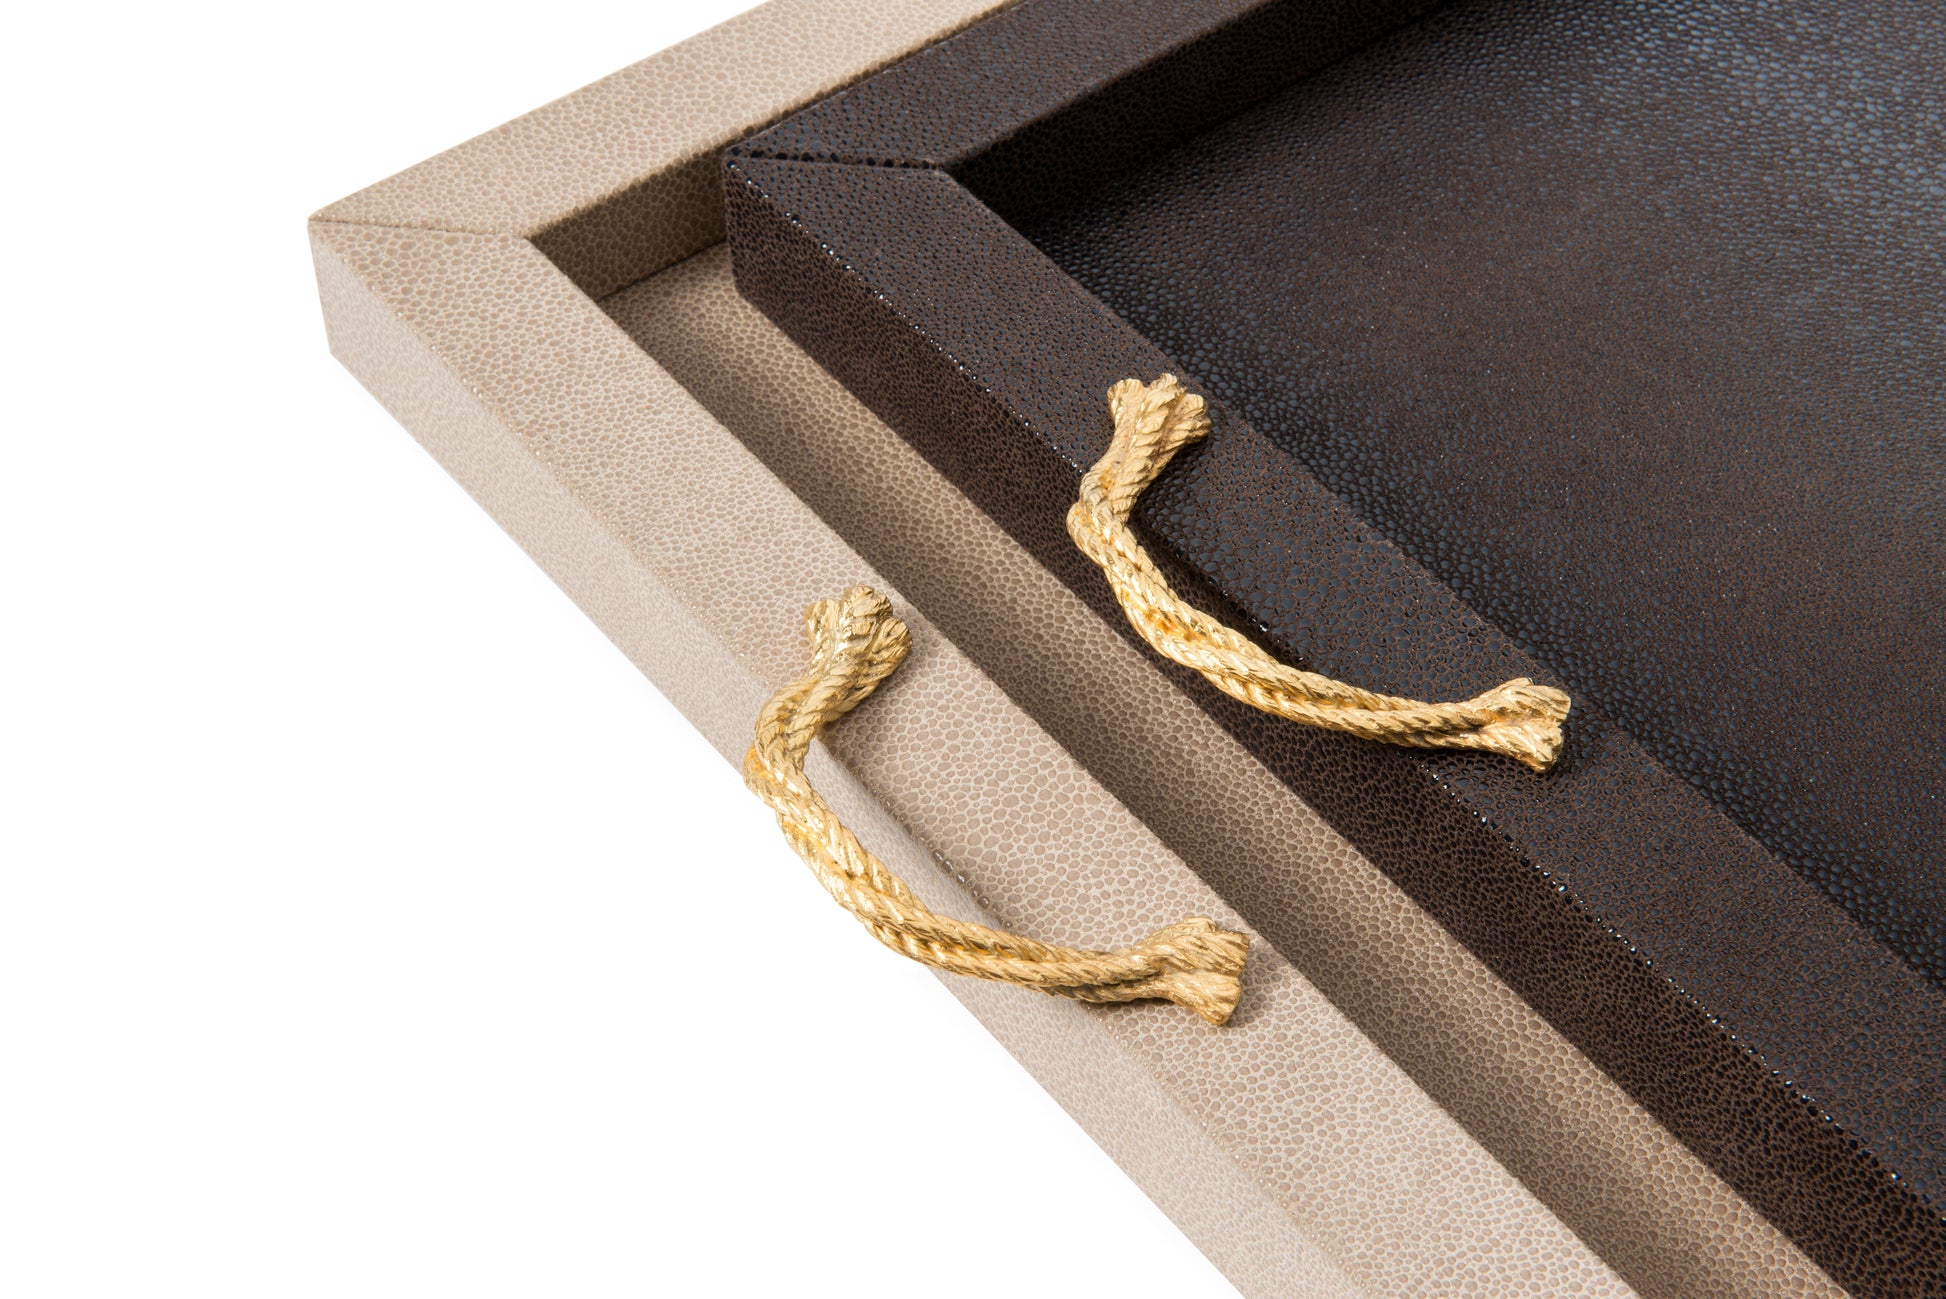 Thalia Tray by Pinetti | Wood base covered in leather | Metal handles with chrome or 24k gold finishing | Home Decor Serveware | 2Jour Concierge, your luxury lifestyle shop